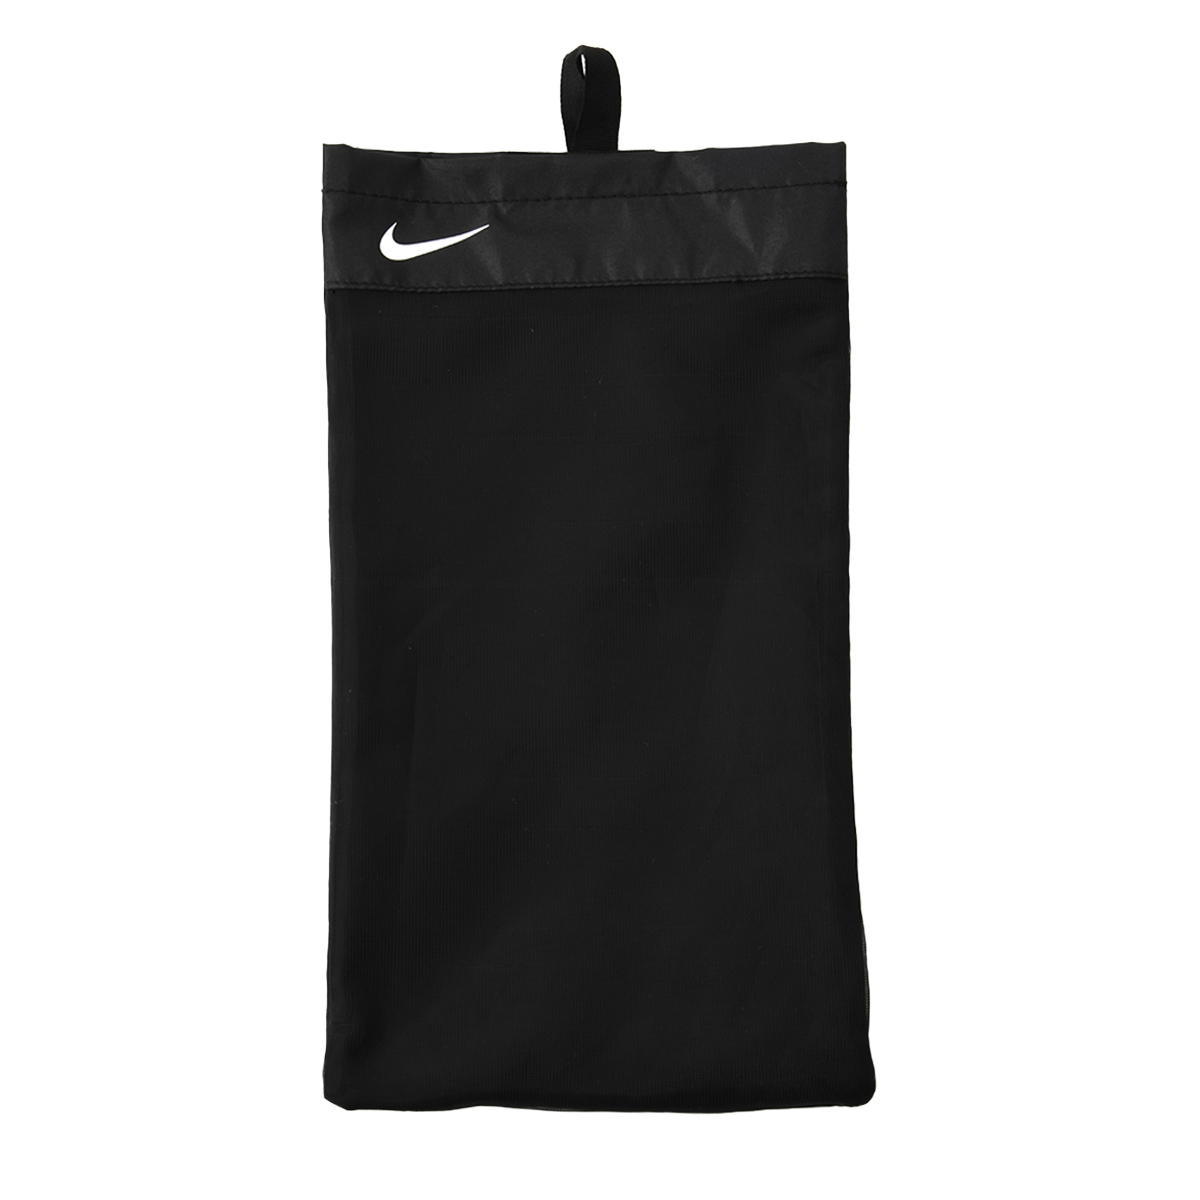 Guantes Nike Goalkeeper Match,  image number null